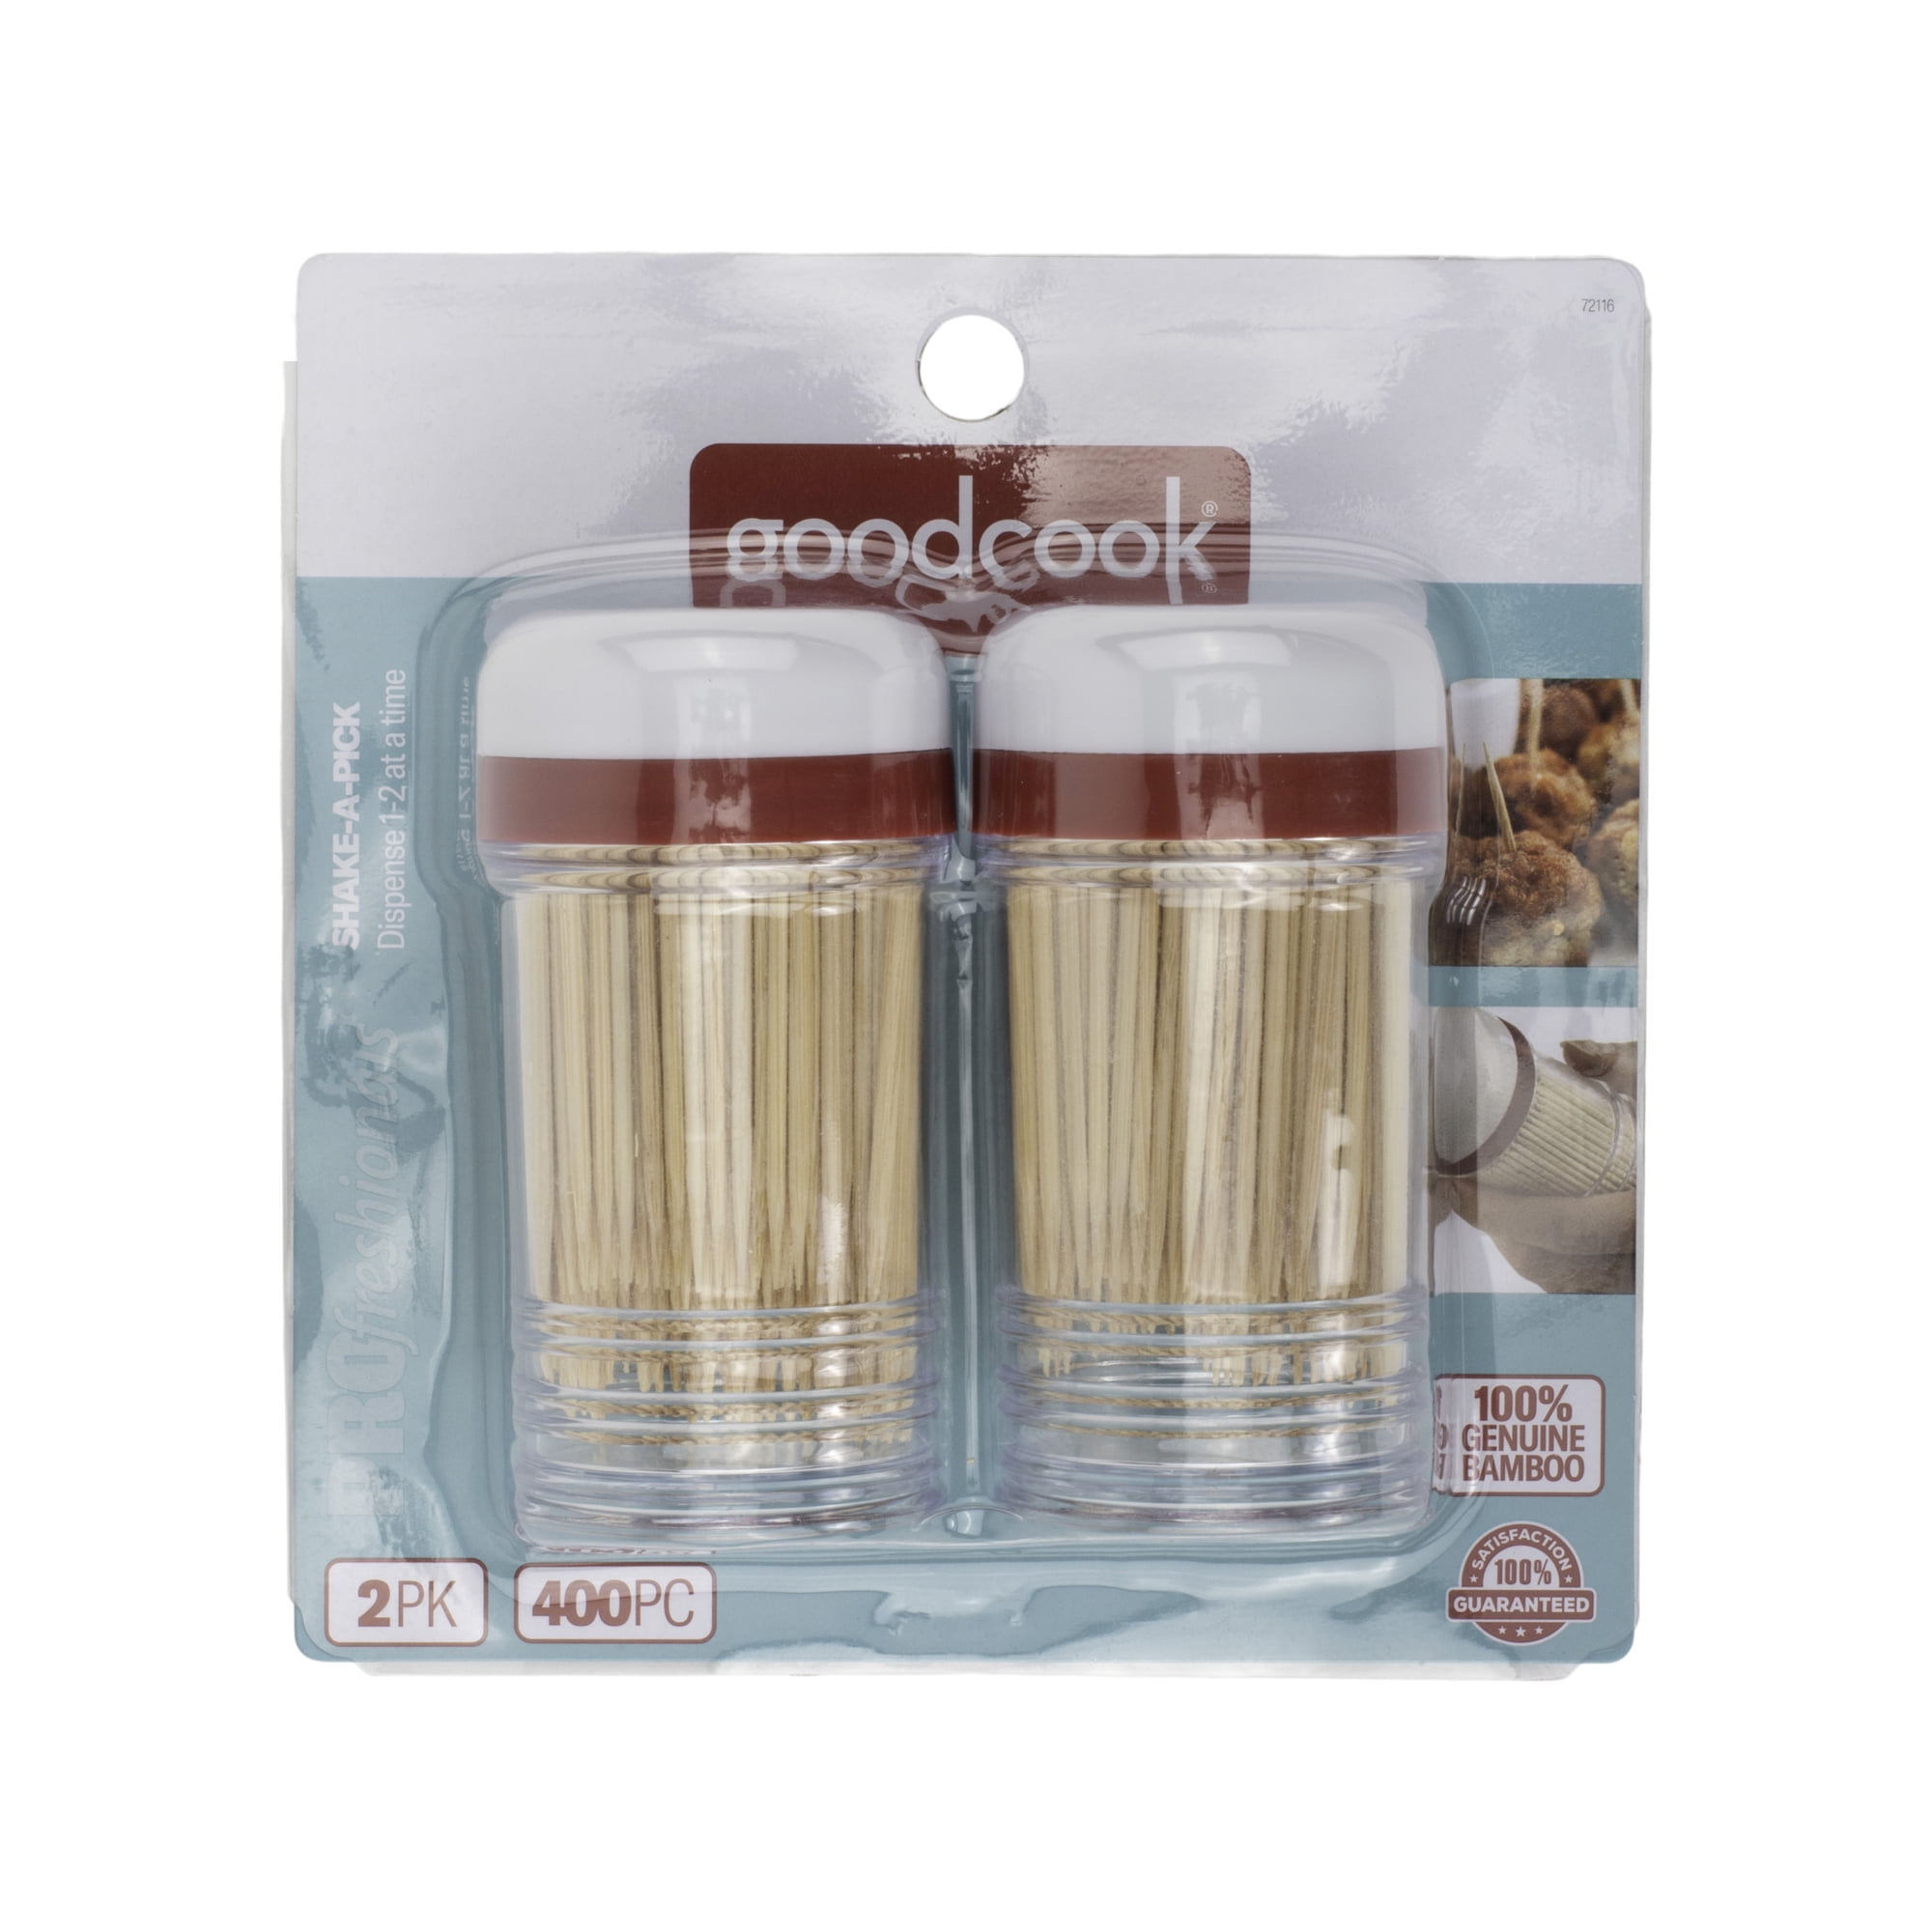 Pocket Plastic Toothpick Dispenser Including Toothpicks - GWSY2319SG -  IdeaStage Promotional Products